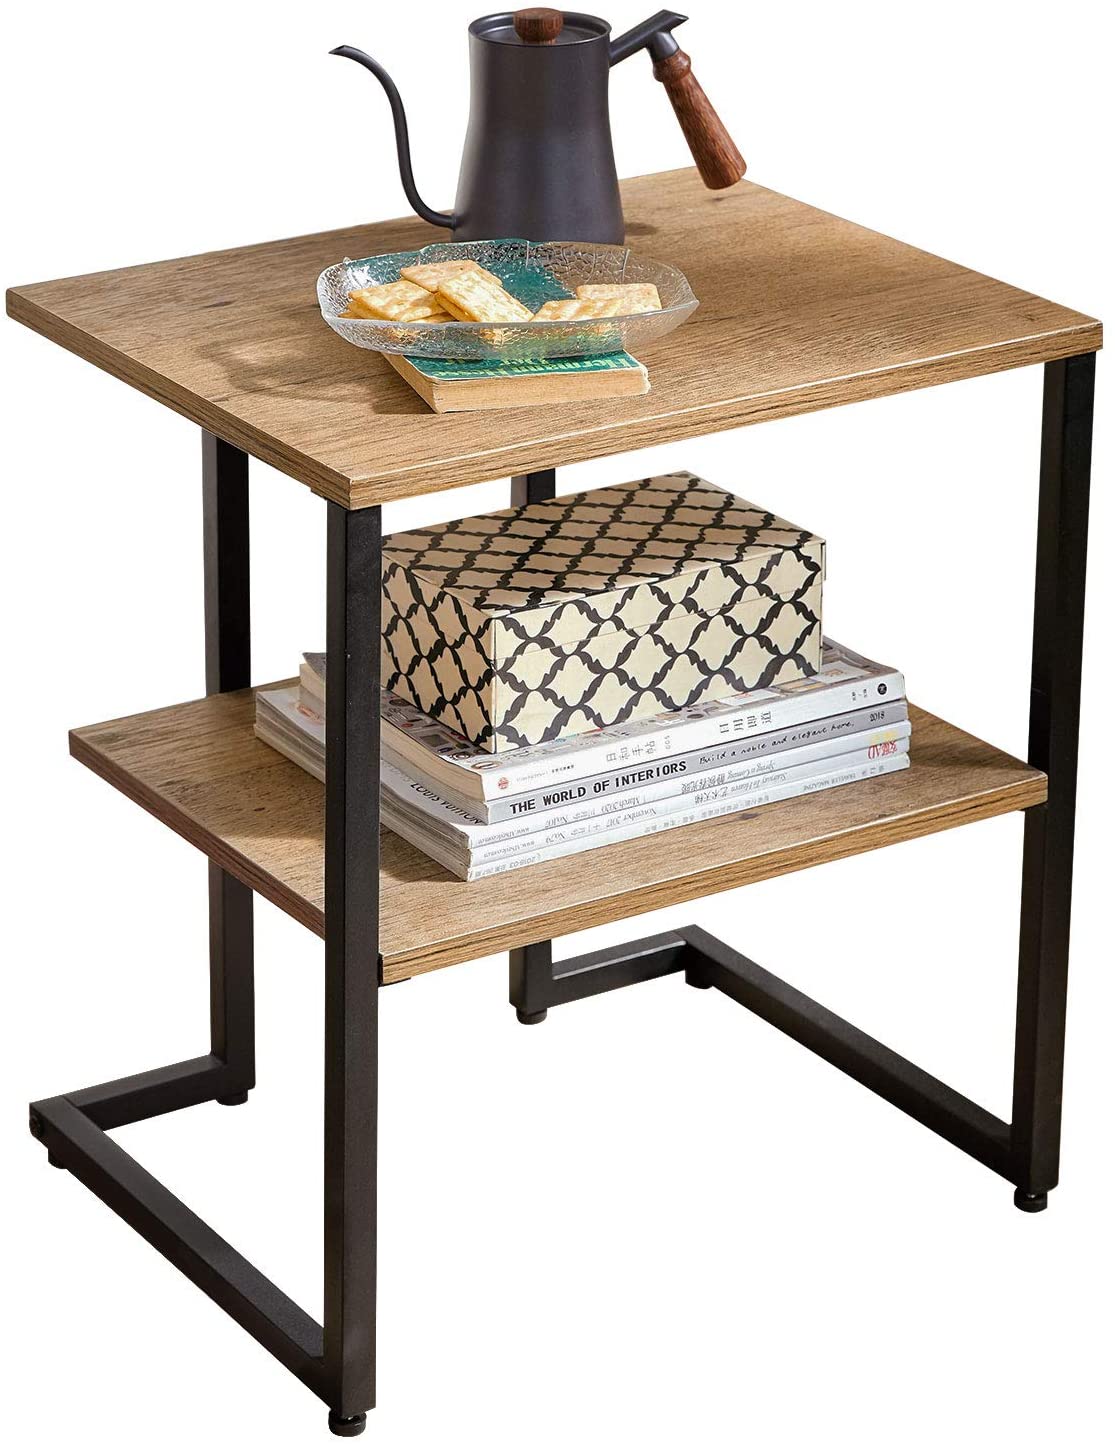 Rustic Side Table With Storage Shelf Wood Board And Metal Frame Industrial Small Corner End Table For Living Room Bedroom